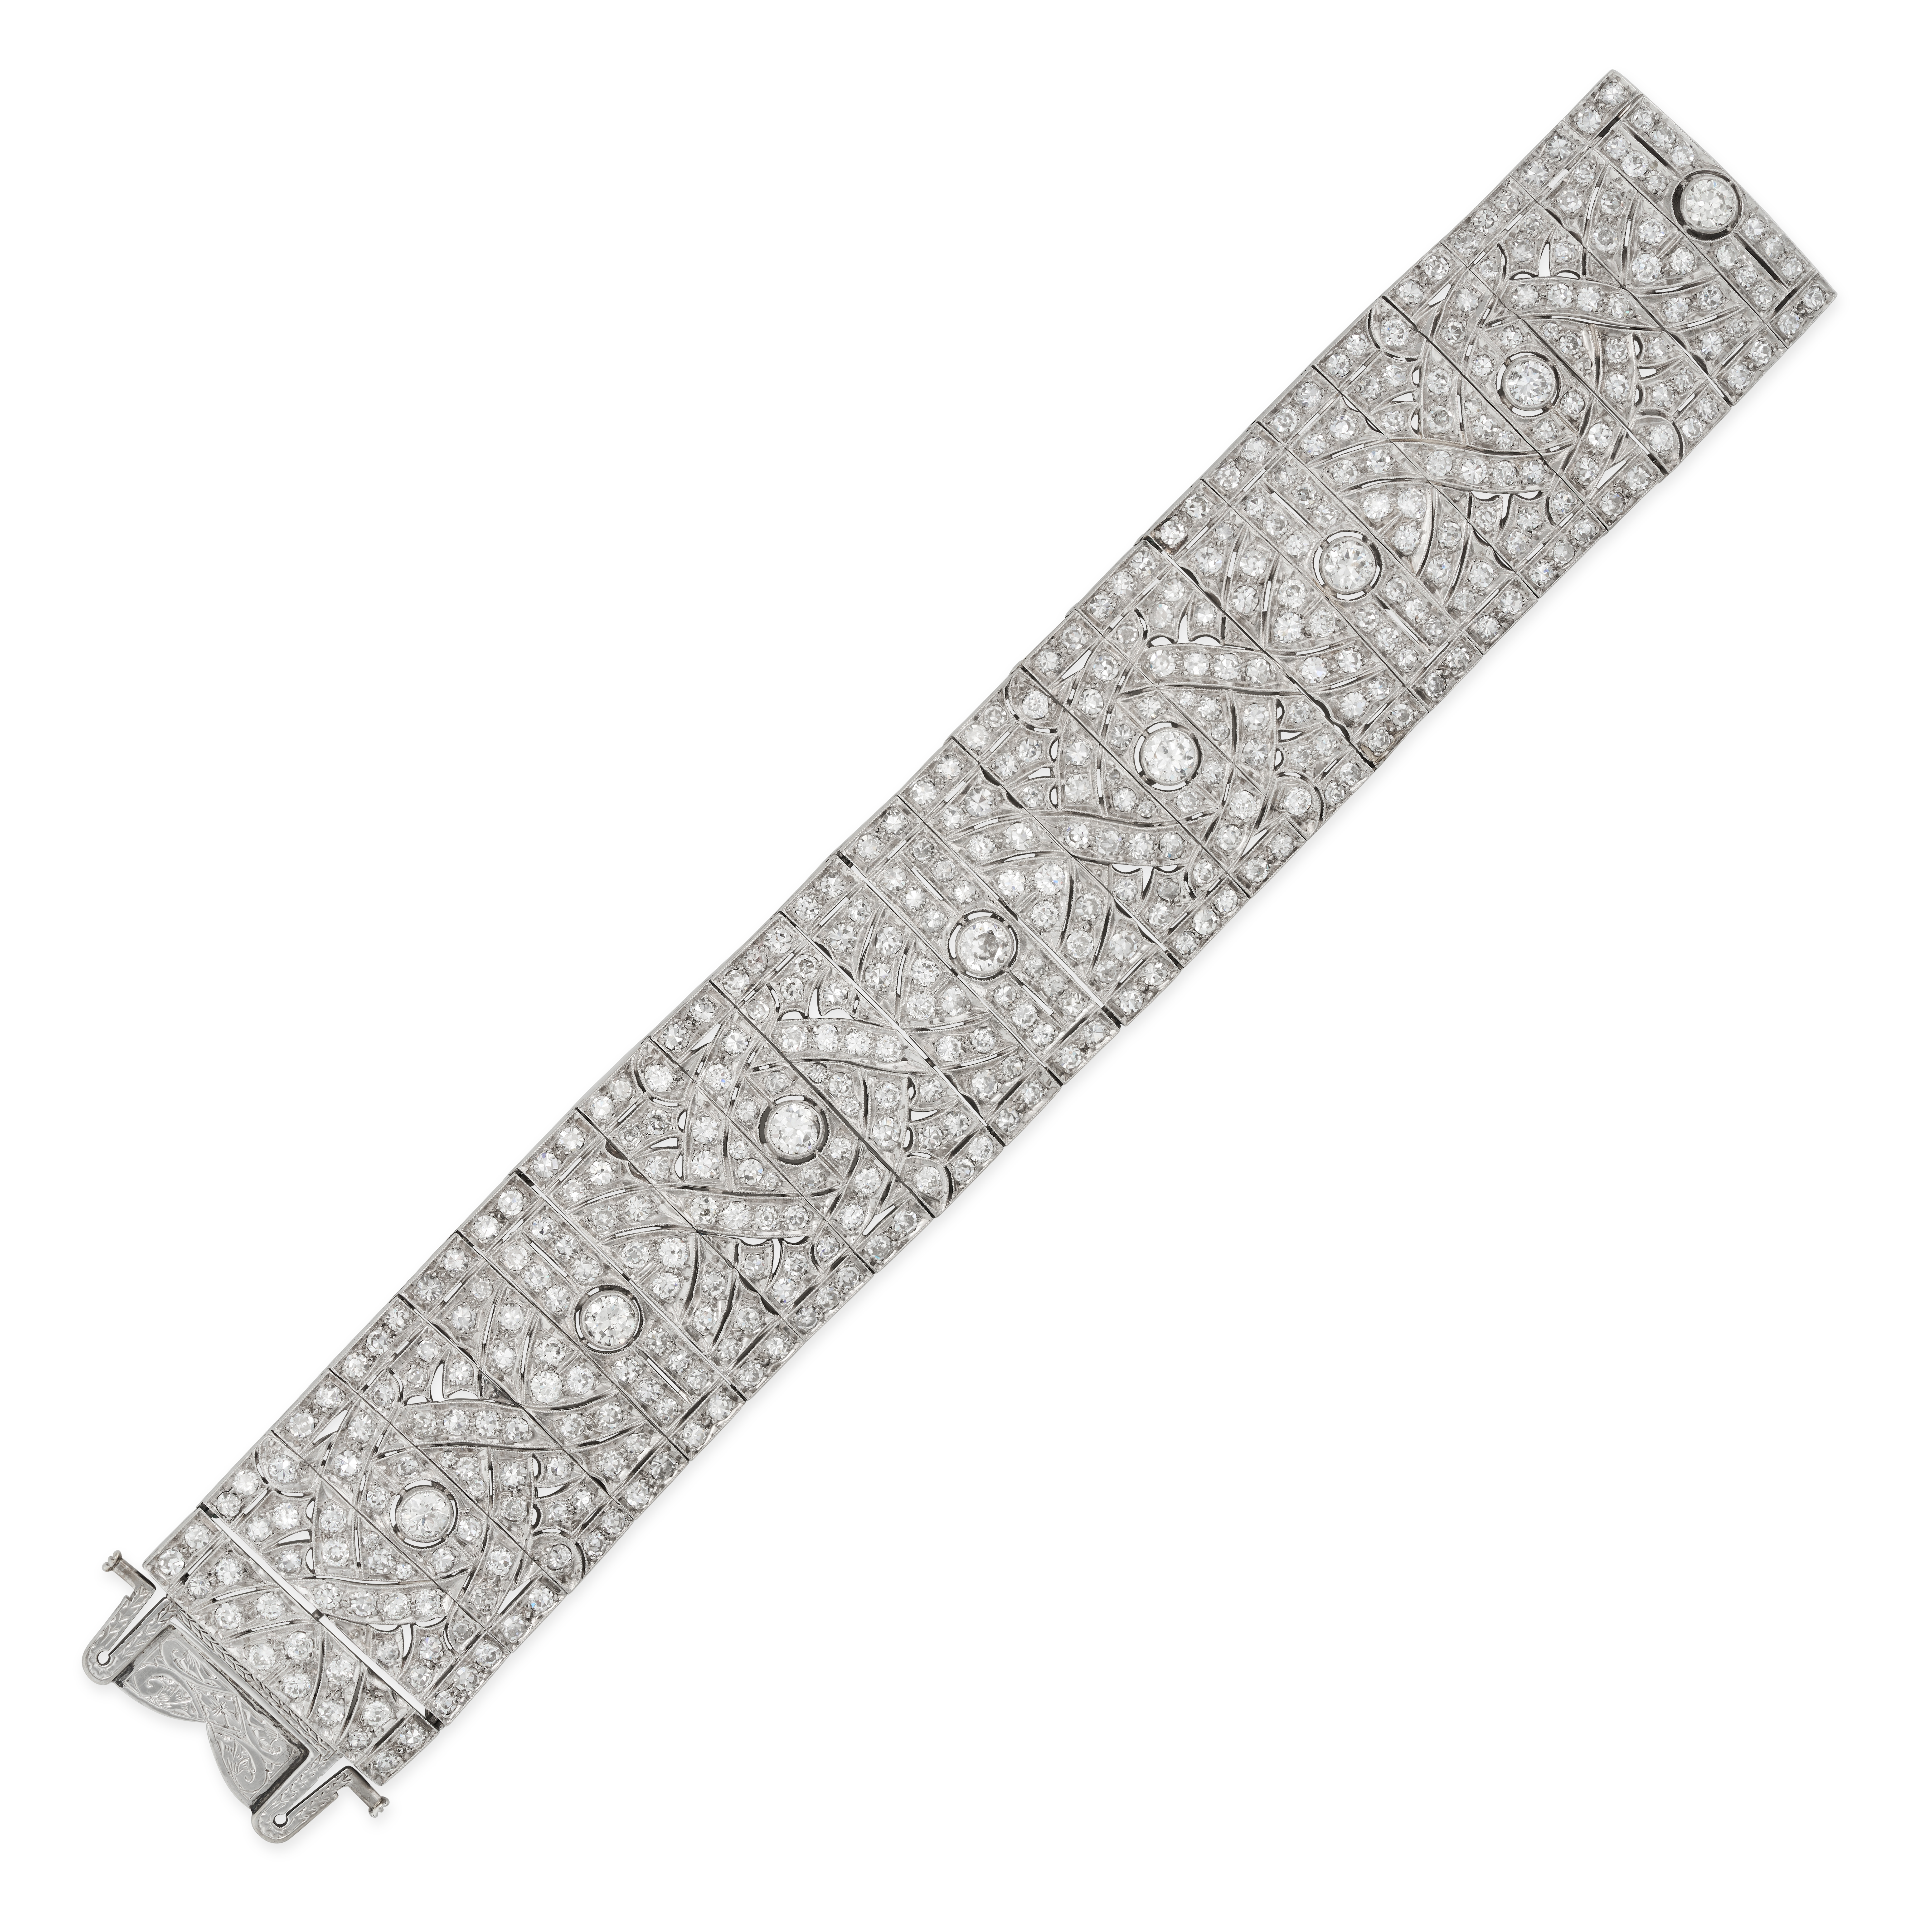 A FINE ART DECO DIAMOND STRAP BRACELET, EARLY 20TH CENTURY in platinum, comprising a row of artic...